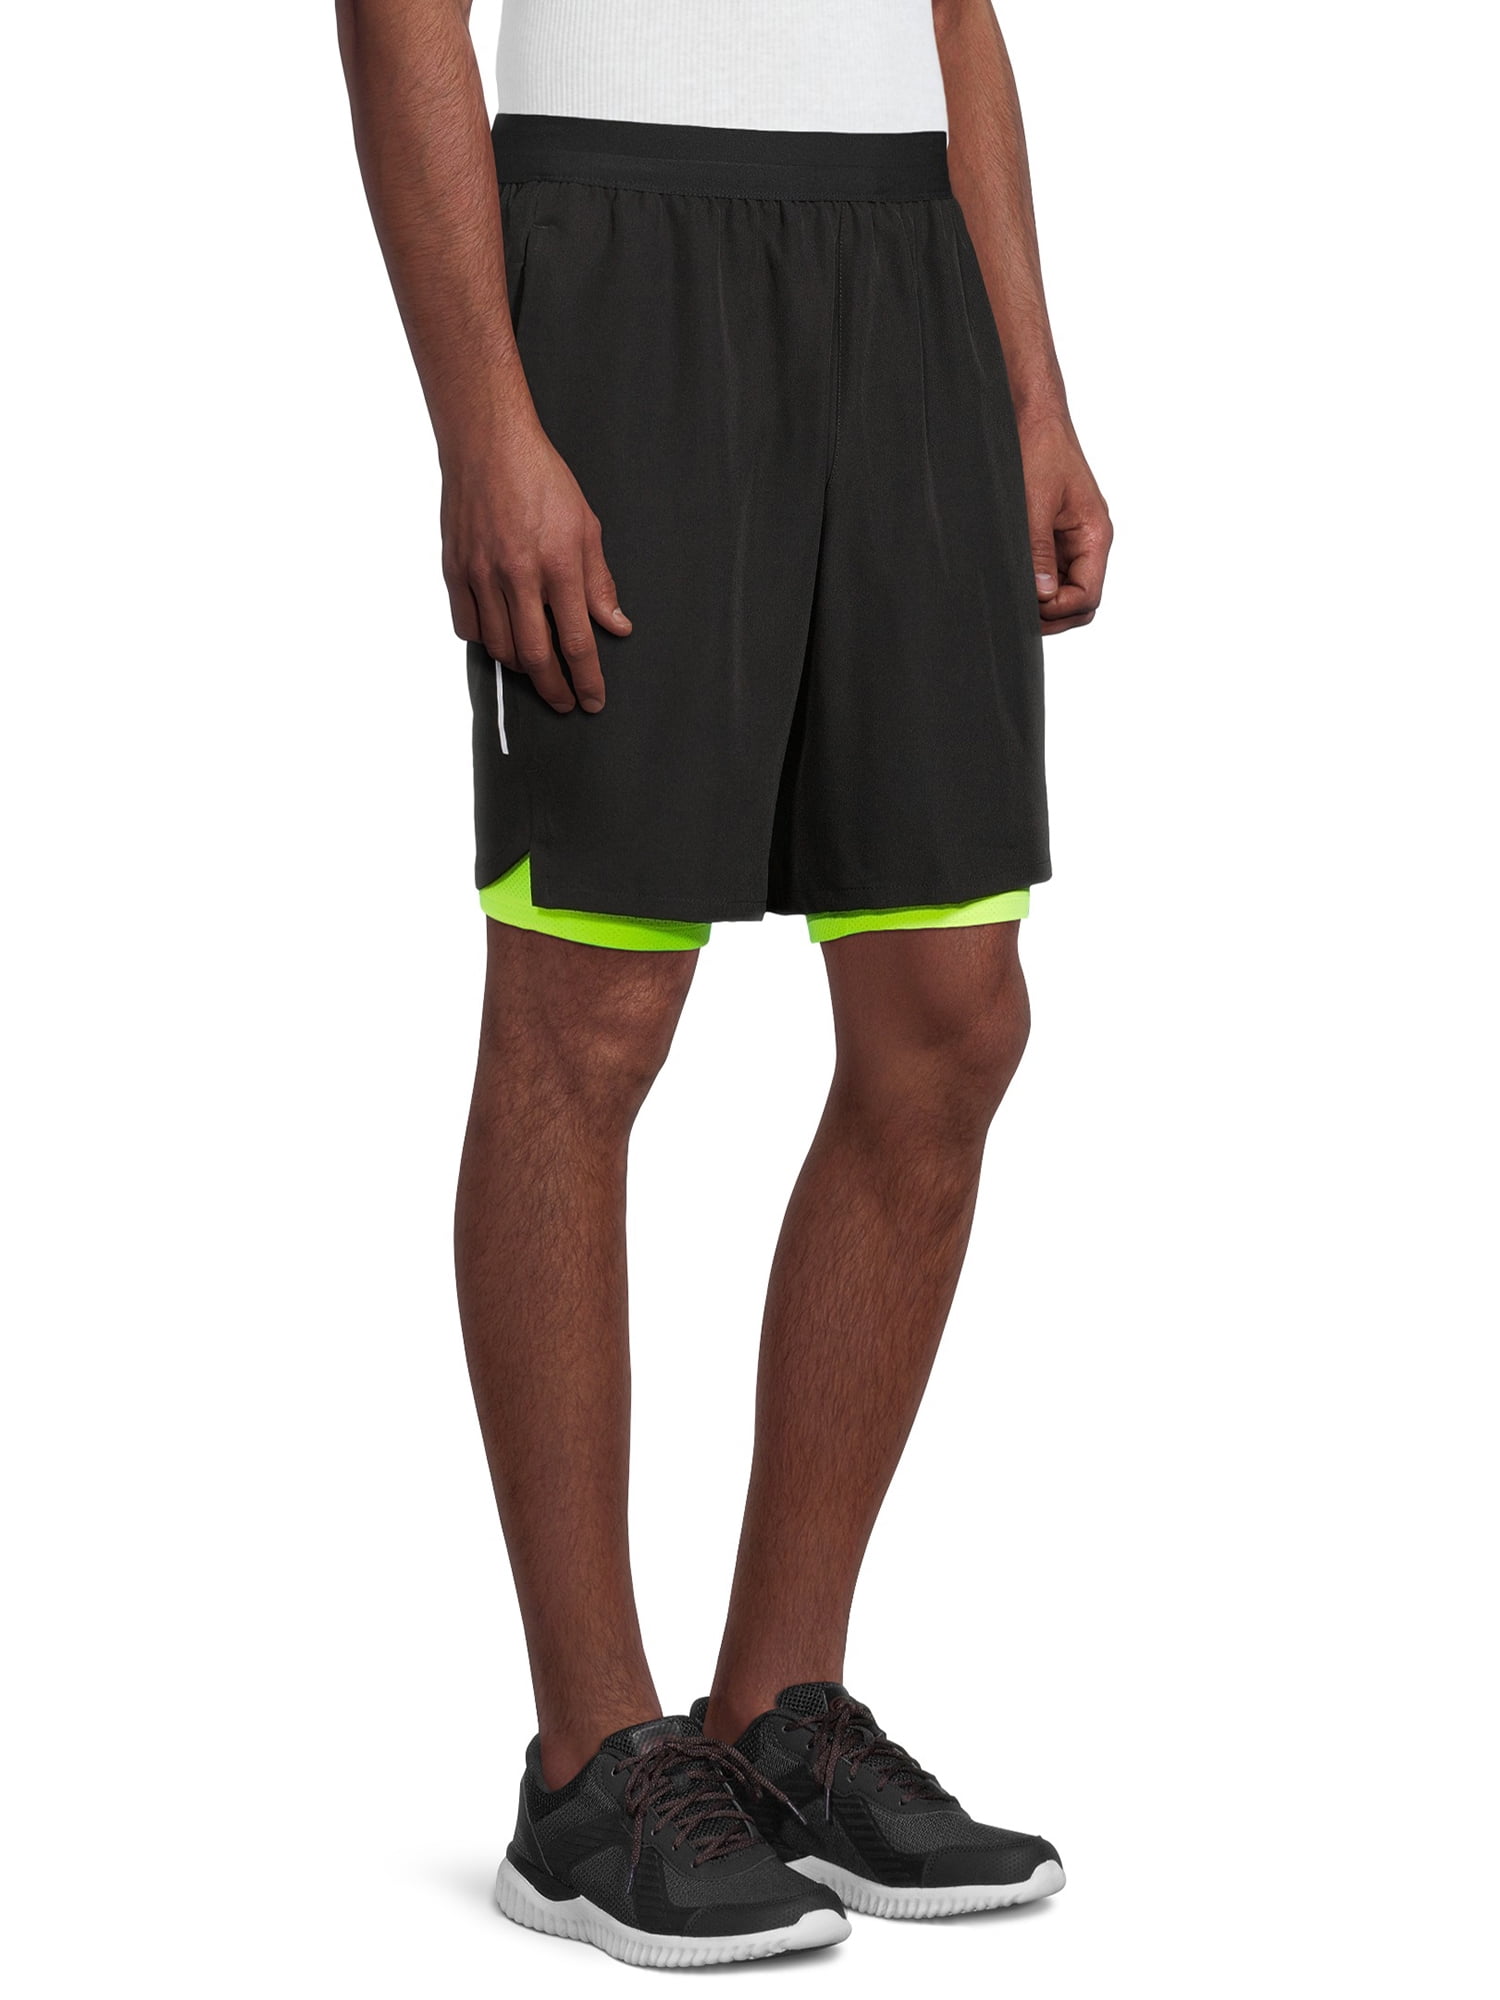 Russell Men's and Big Men's Active 2-in-1 Woven 9" Shorts with up to size 5XL Walmart.com